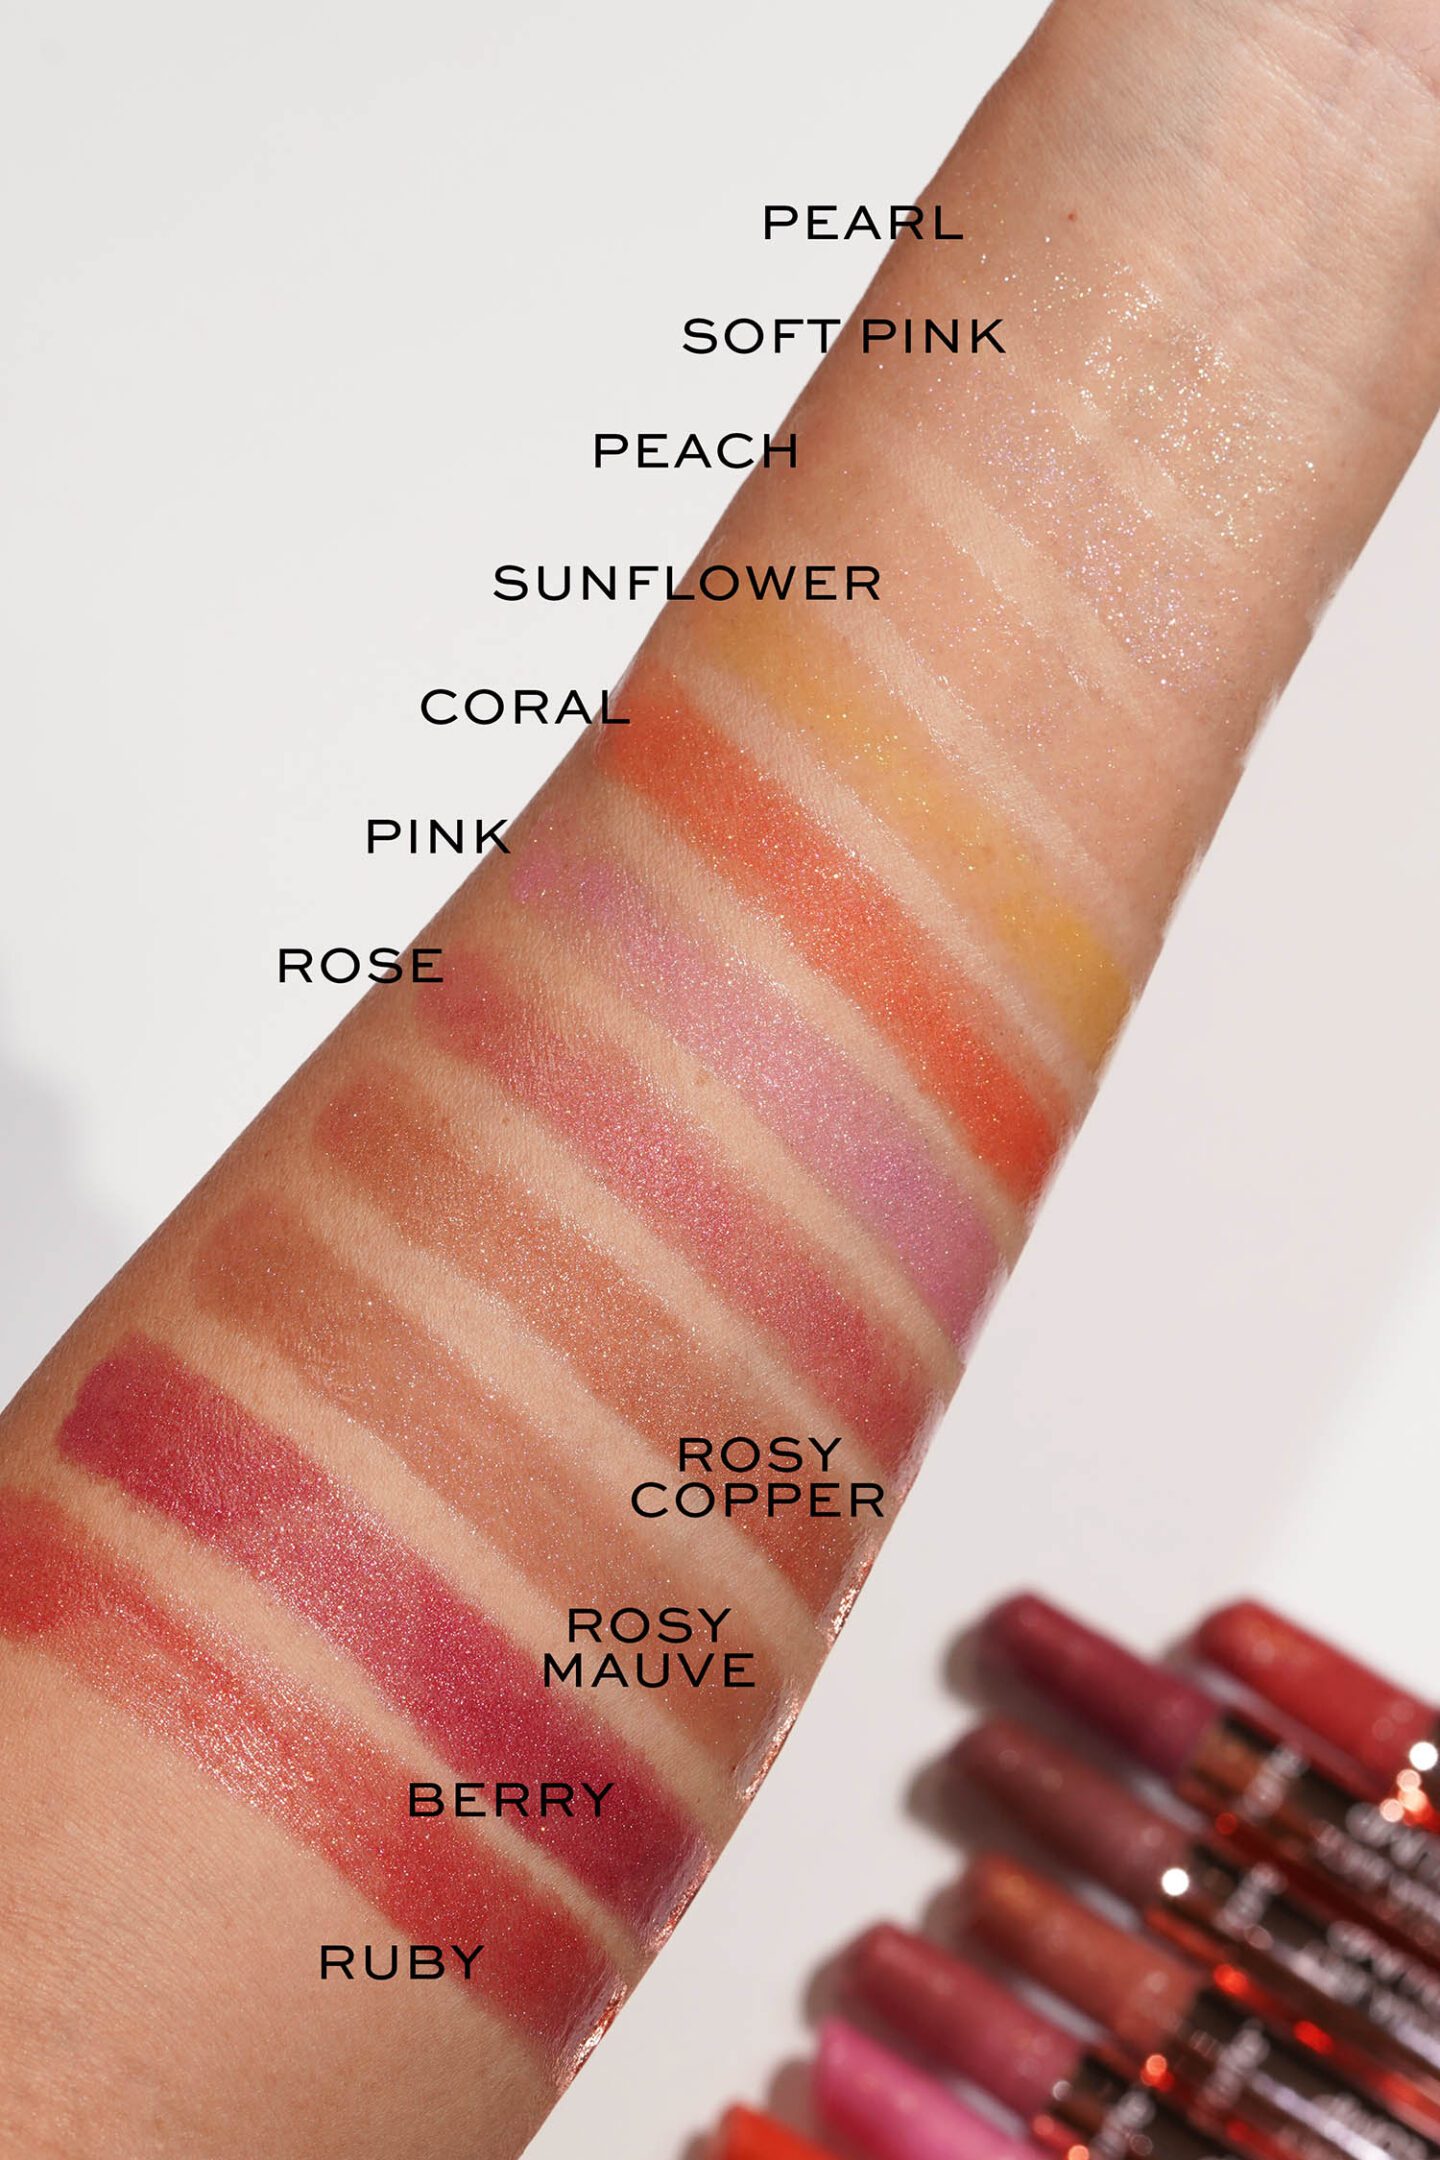 Tarte Maracuja Juicy Lip Plump Shimmer Glass swatches